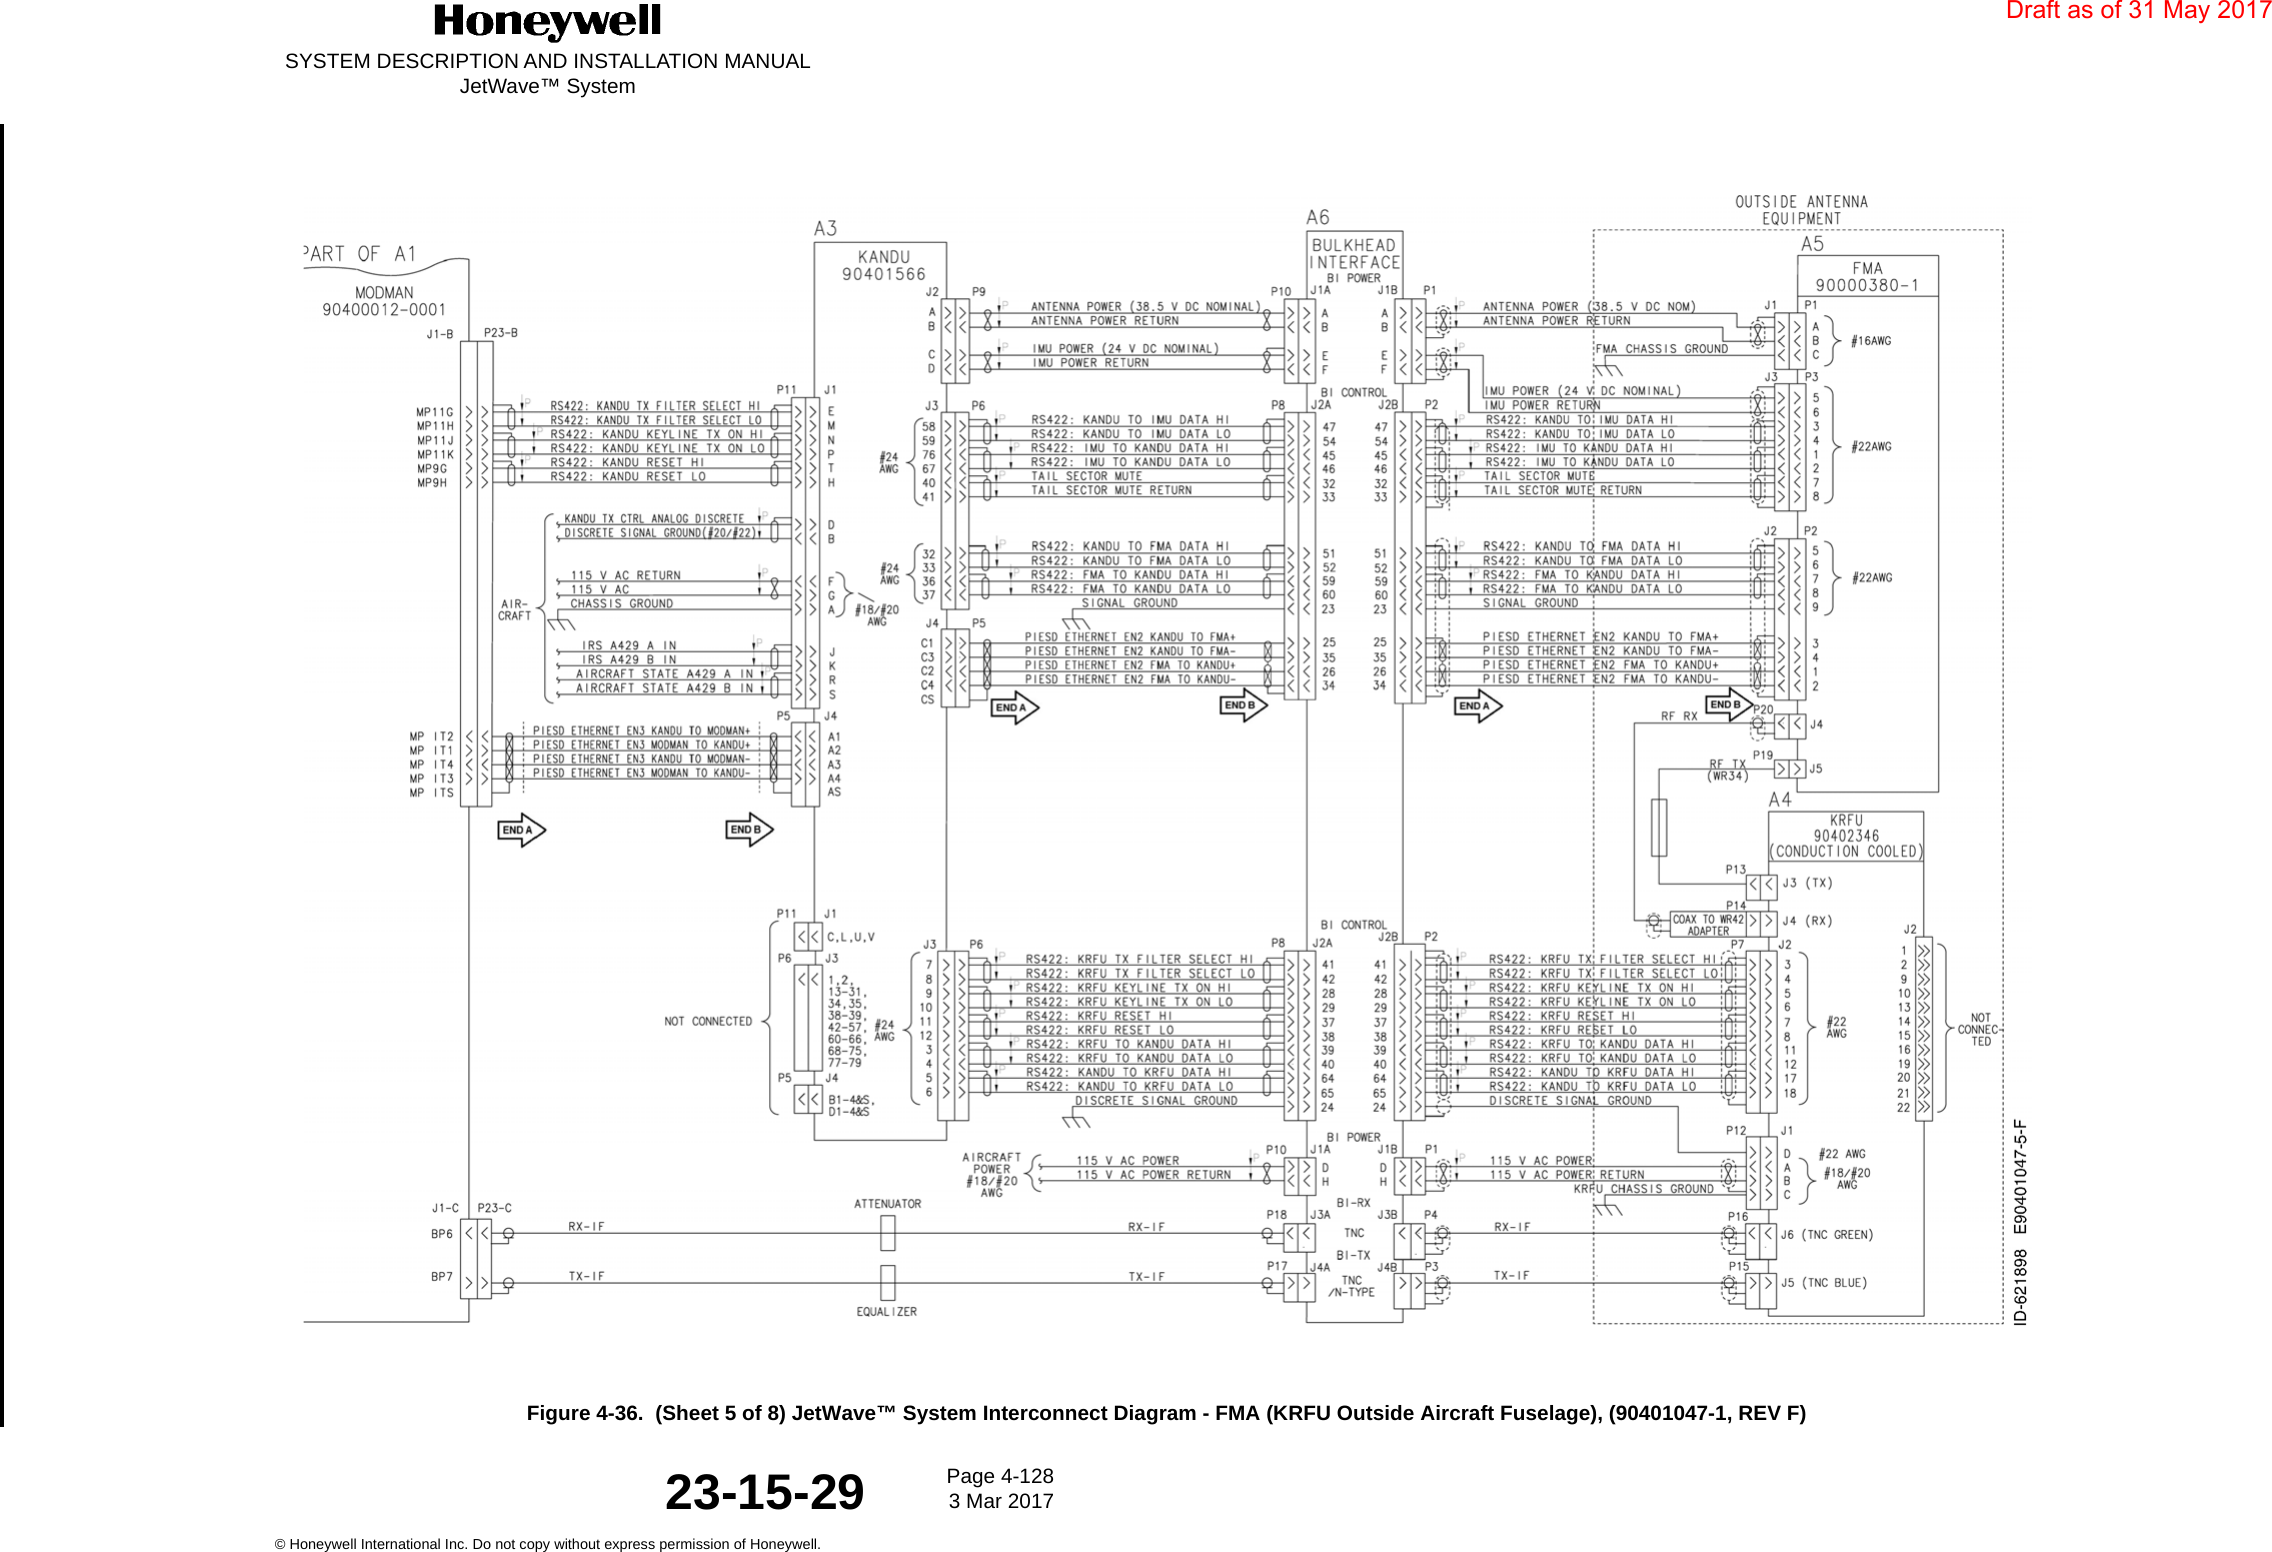 SYSTEM DESCRIPTION AND INSTALLATION MANUALJetWave™ SystemPage 4-128 3 Mar 2017© Honeywell International Inc. Do not copy without express permission of Honeywell.23-15-29Figure 4-36.  (Sheet 5 of 8) JetWave™ System Interconnect Diagram - FMA (KRFU Outside Aircraft Fuselage), (90401047-1, REV F)Draft as of 31 May 2017